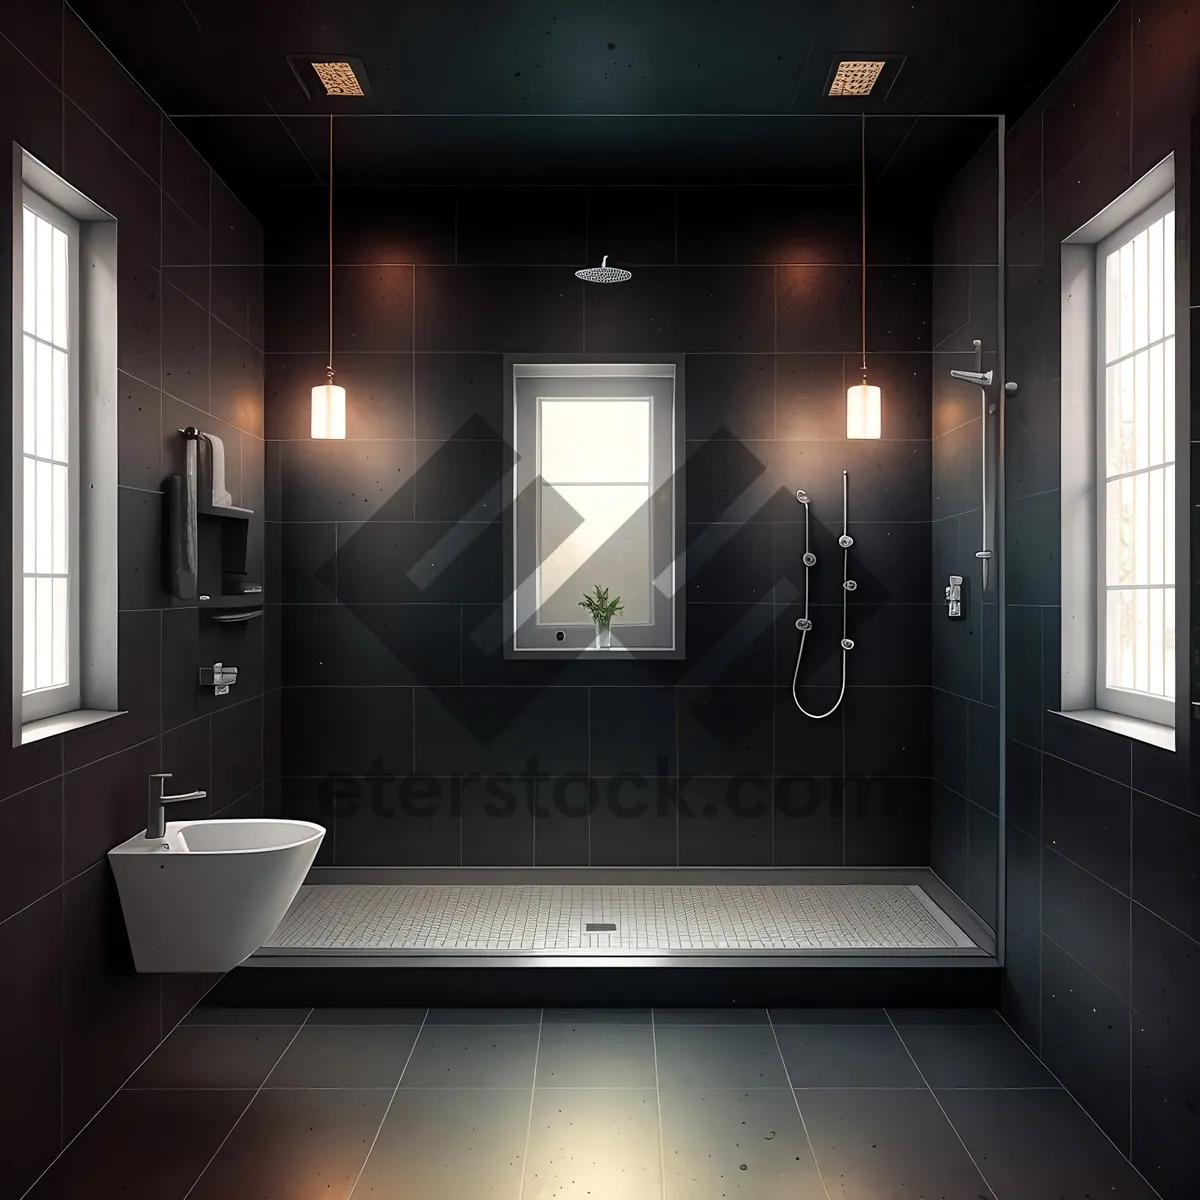 Picture of Modern Luxury Bathroom with Wood Flooring and Glass Shower